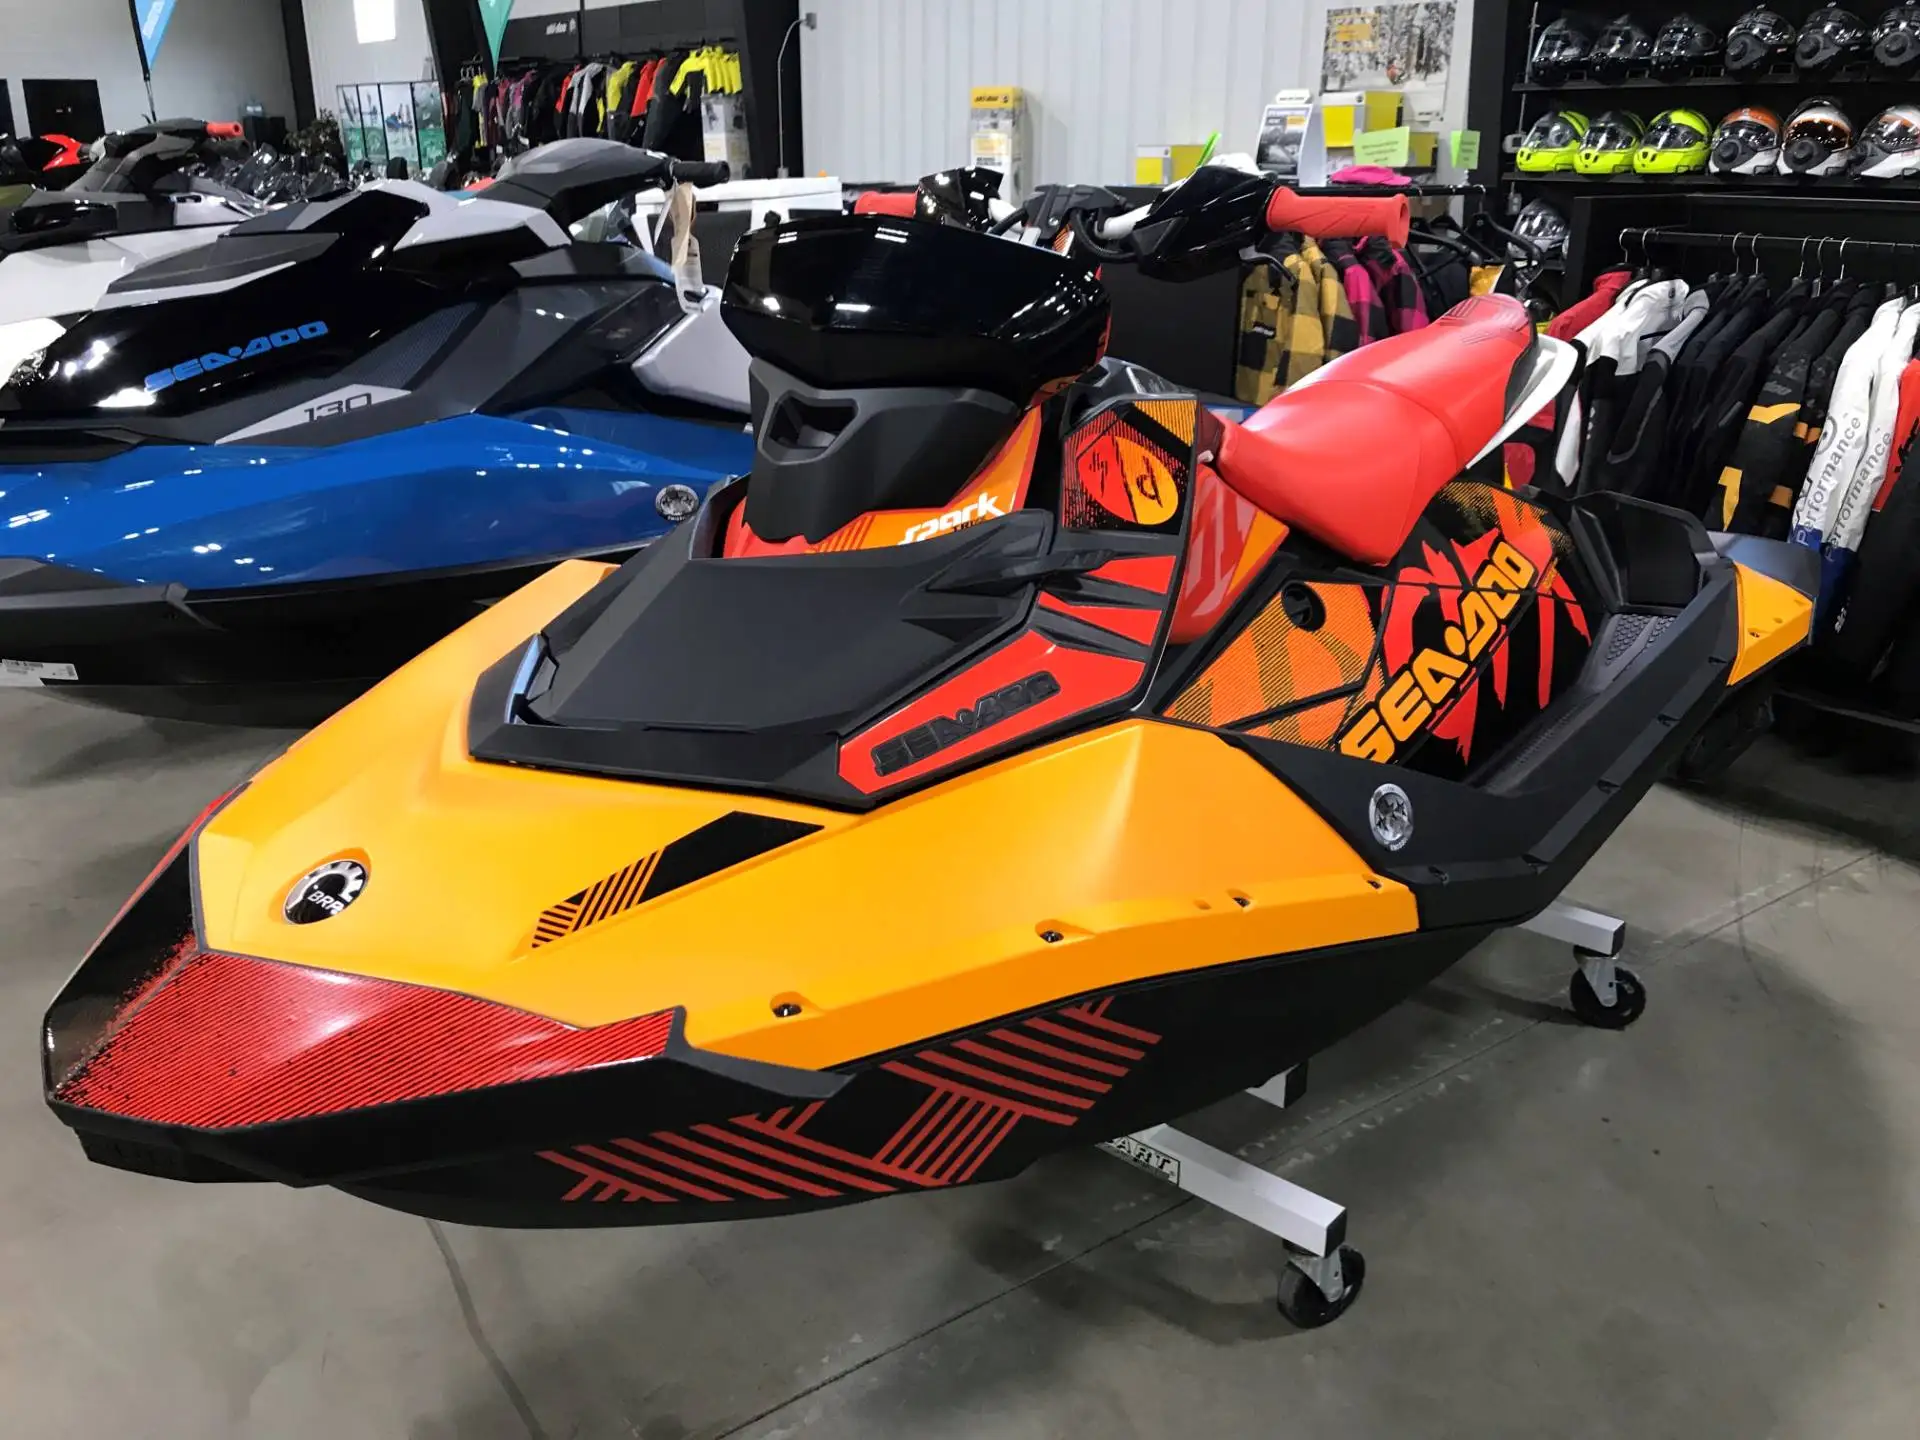 SUMMER SALES DISCOUNT ON Free Shipping New 2022 Sea Doo Spark Trixx 3-up Rotax 900 H.O. A C E iBR with Three Seater Jet Ski Hot